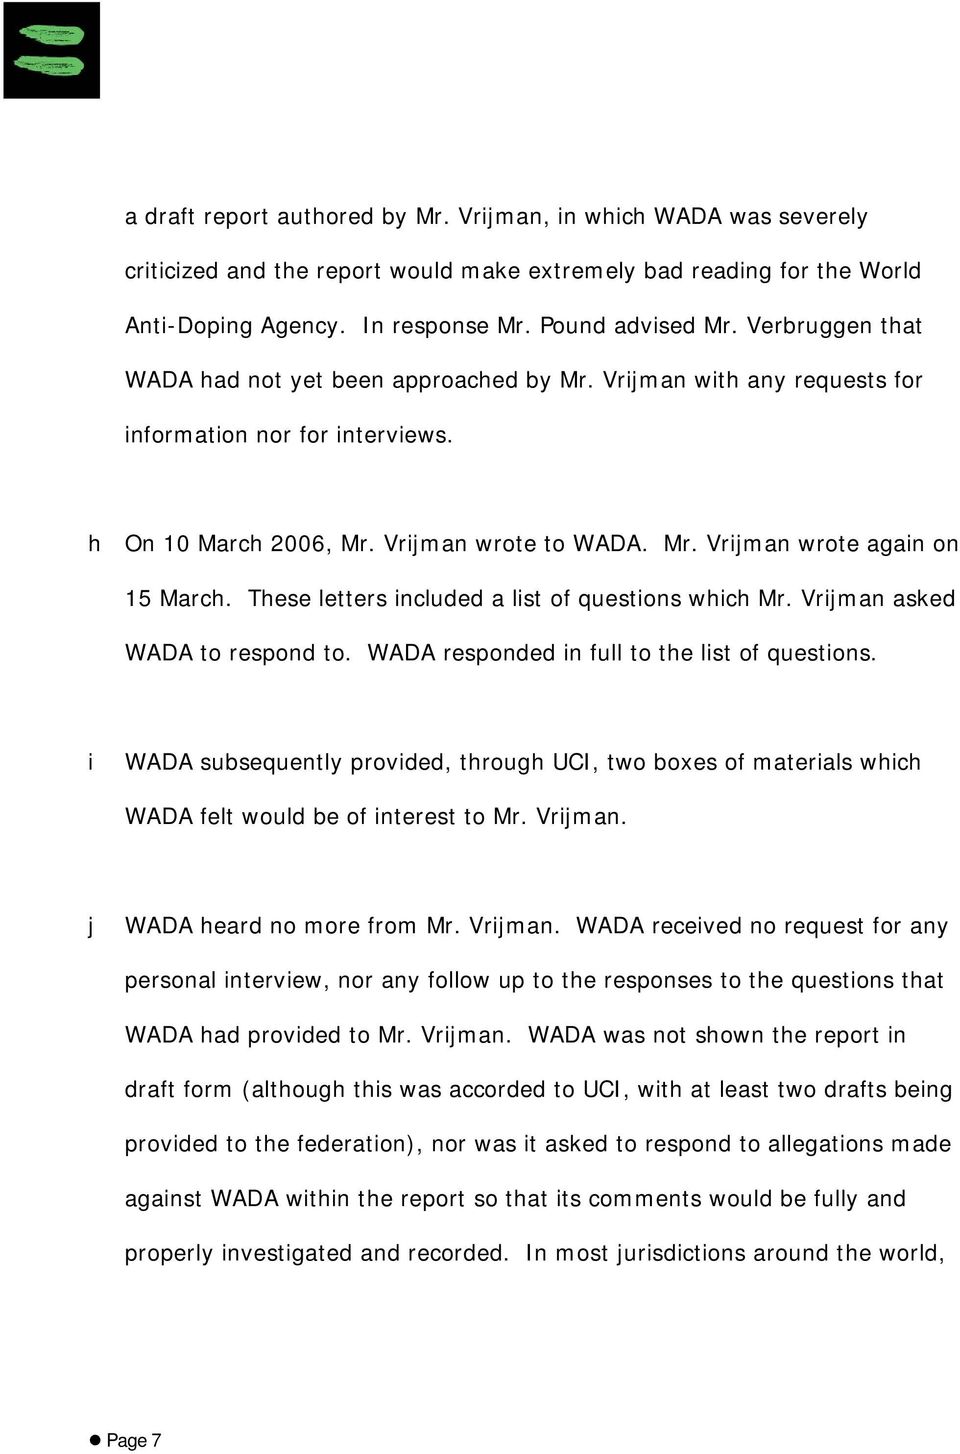 These letters included a list of questions which Mr. Vrijman asked WADA to respond to. WADA responded in full to the list of questions.